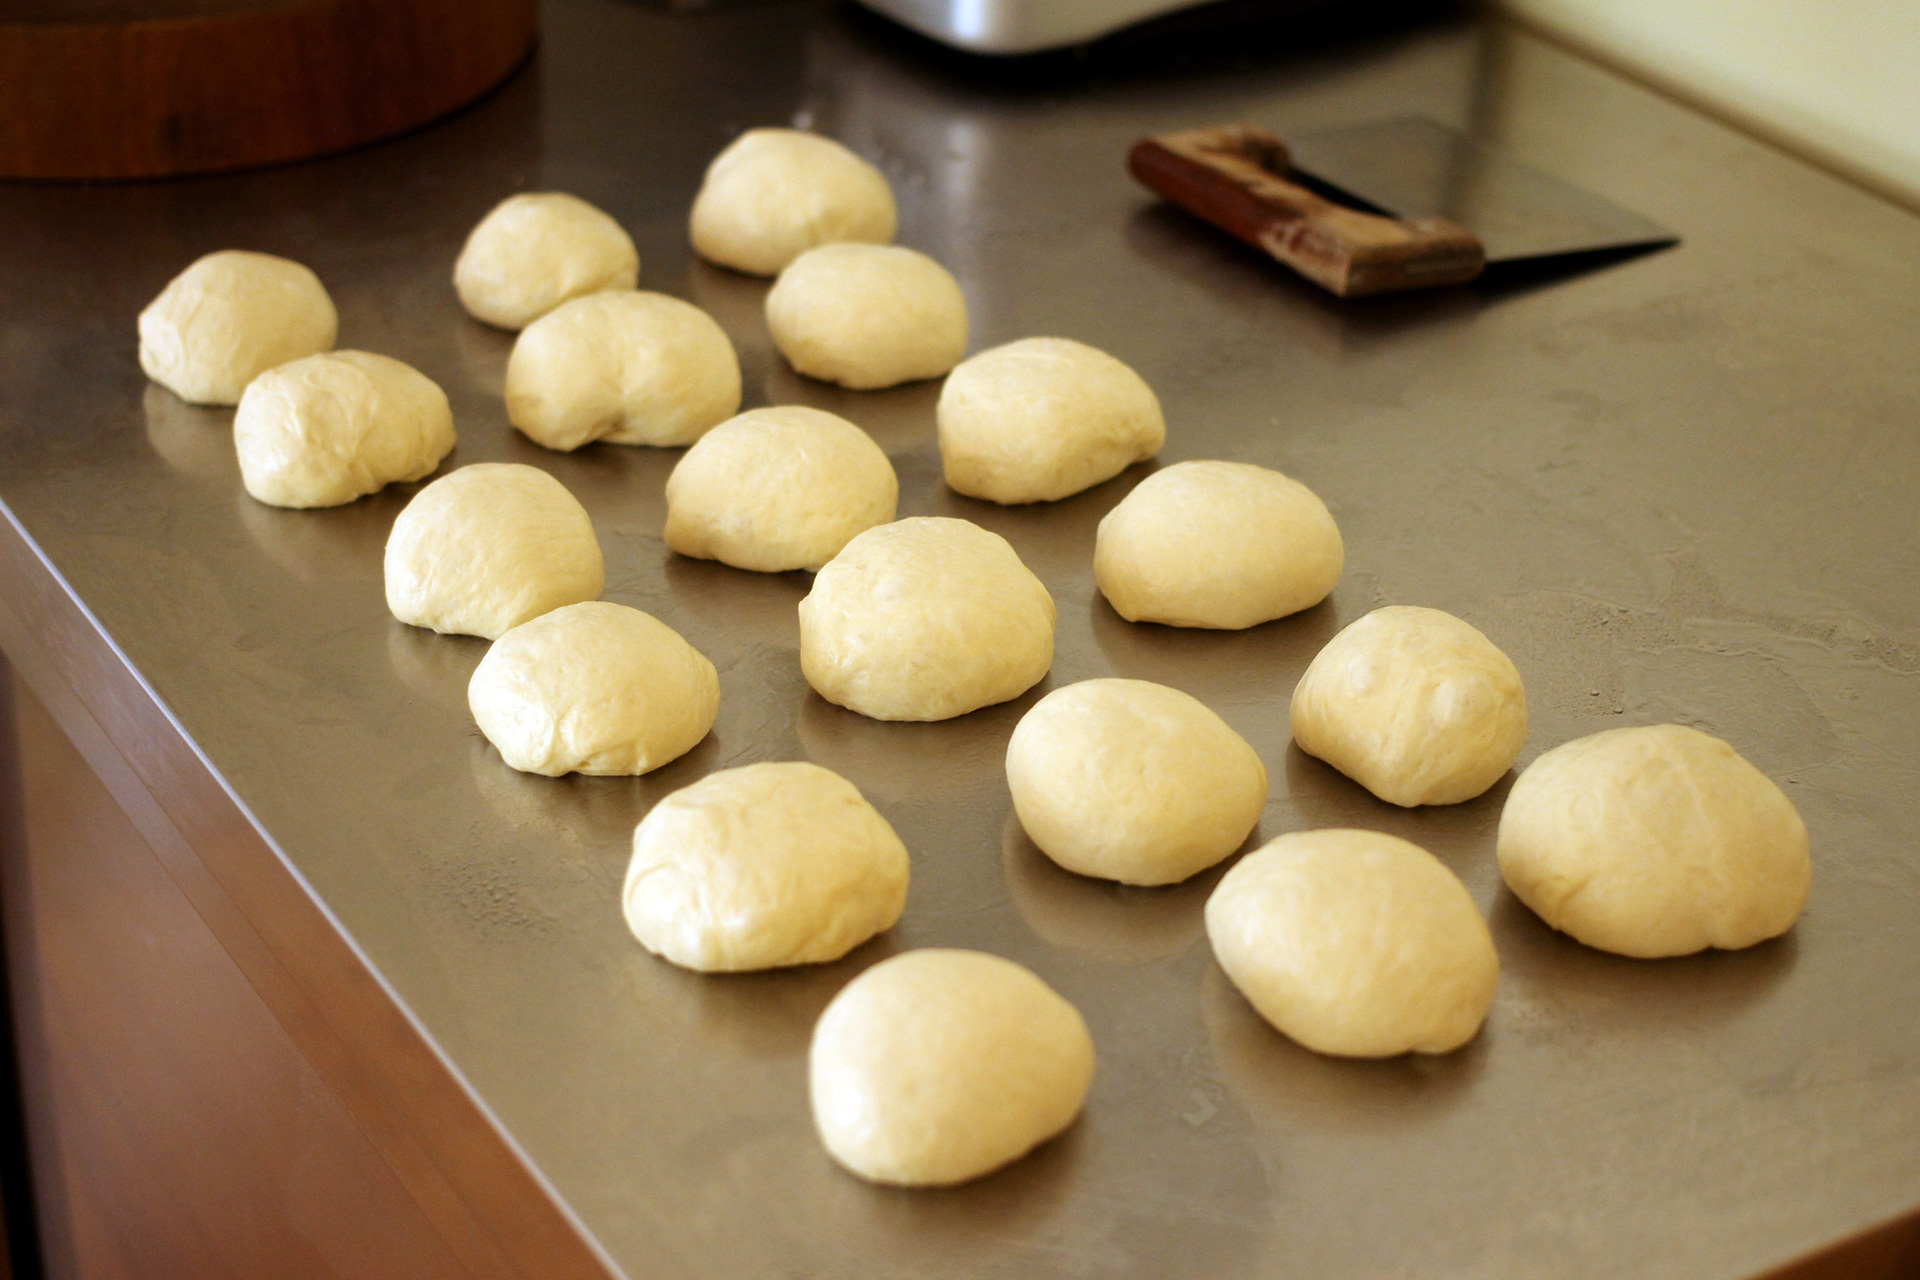 Shape the dough into balls before rolling it into hot dog bun-shaped cylinders.